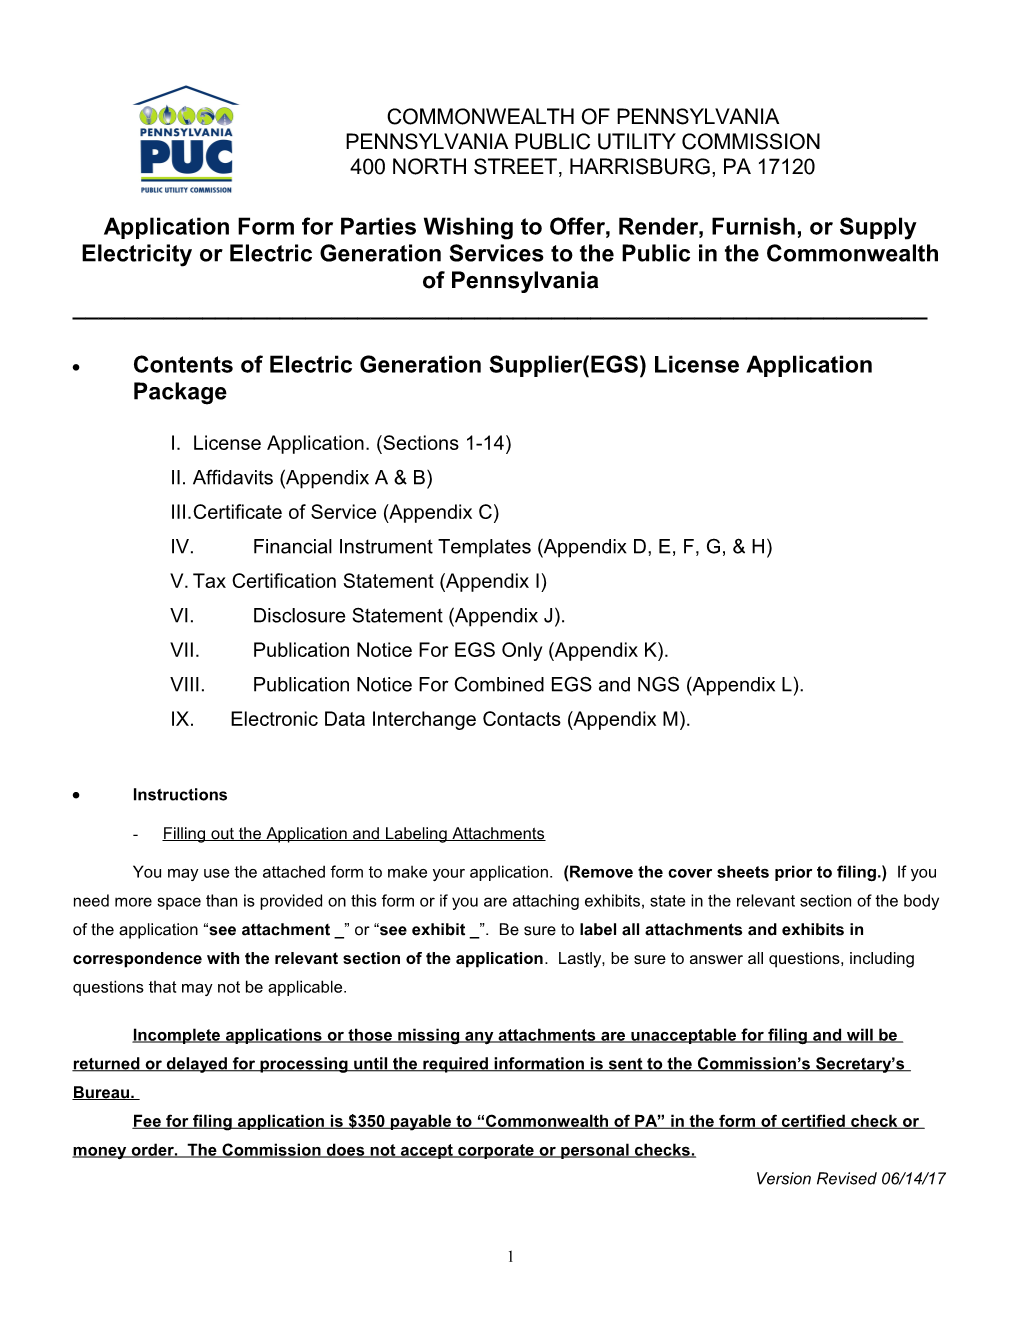 Contents of Electric Generation Supplier(EGS) License Application Package